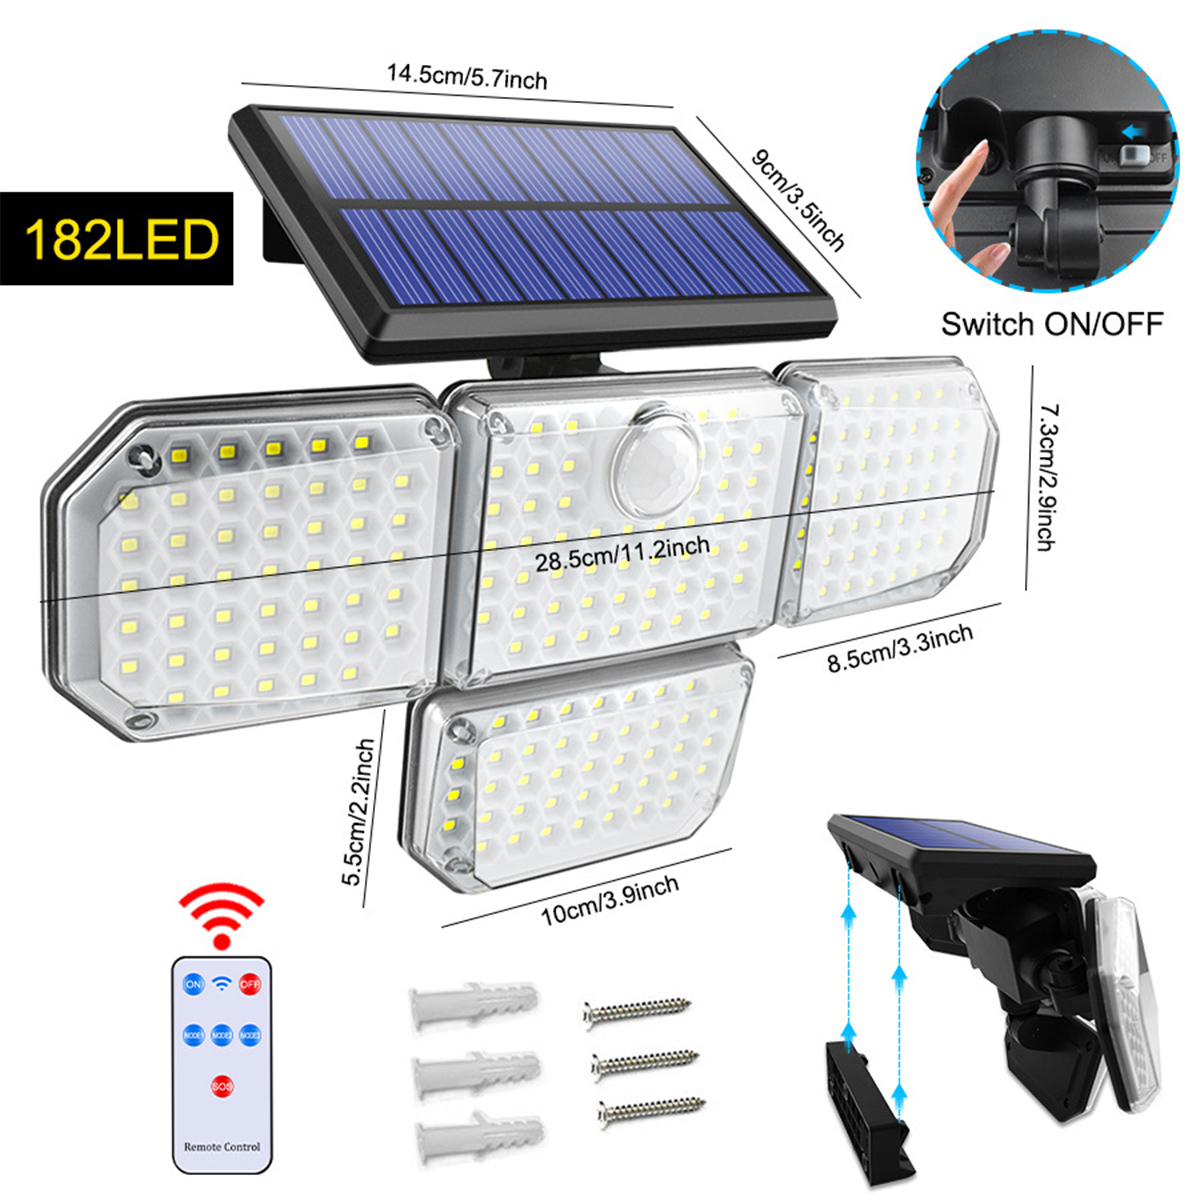 182LED-Solar-Wall-Lamp-Three-head-Induction-Street-Light-Pathway-Lighting-With-Remote-Control-1881796-8